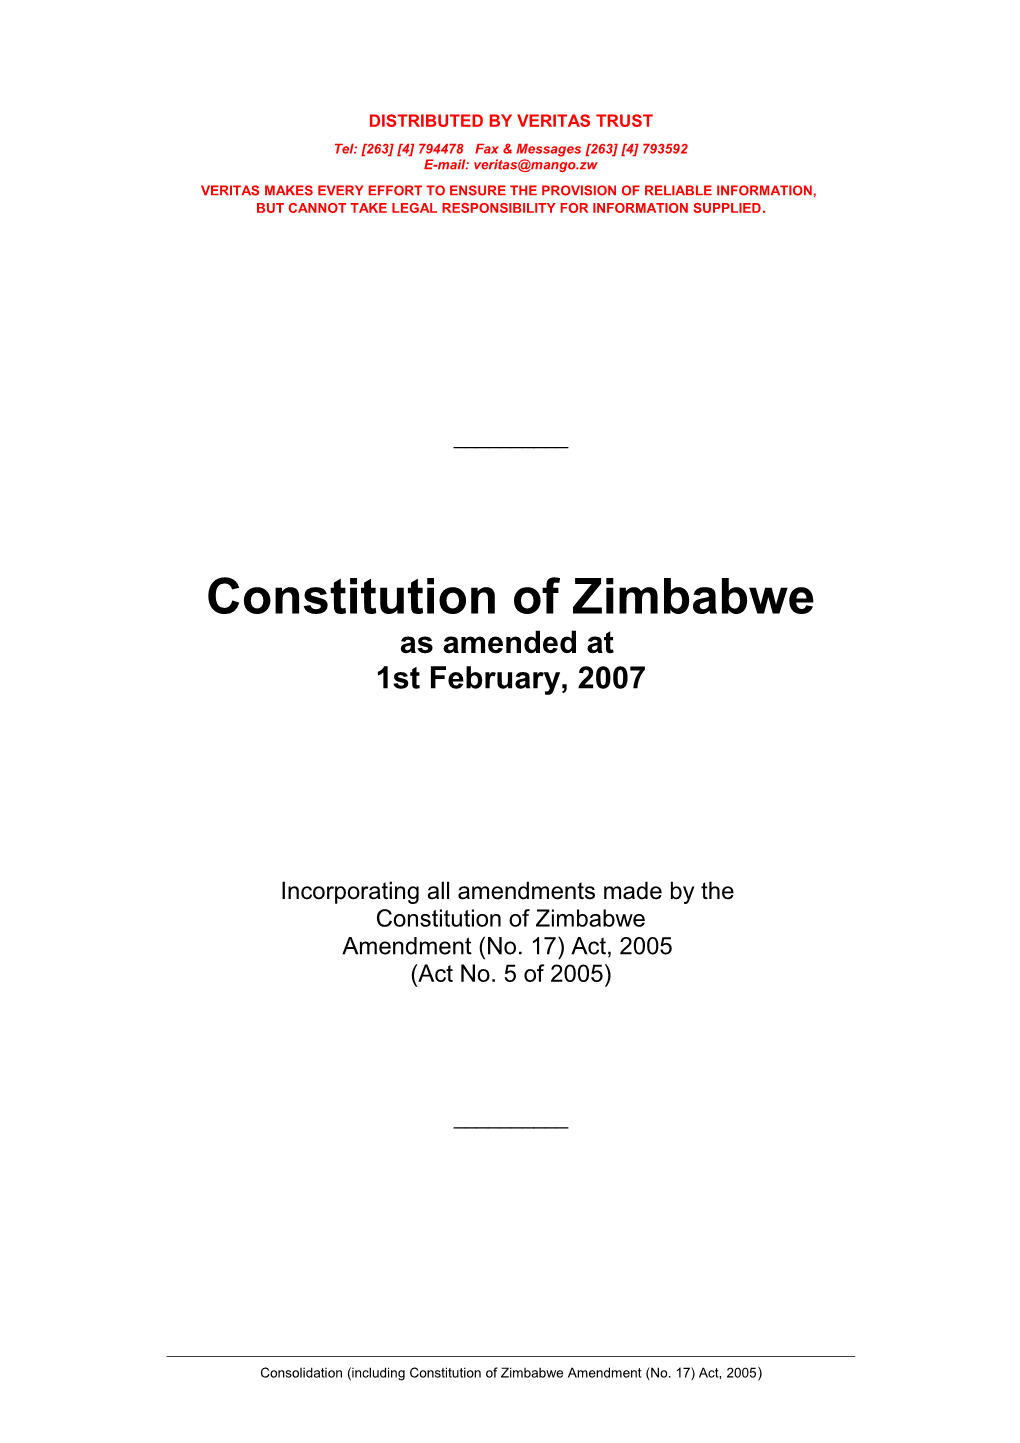 CONSTITUTION of ZIMBABWE AS AMENDED up to and Including Amendment 17